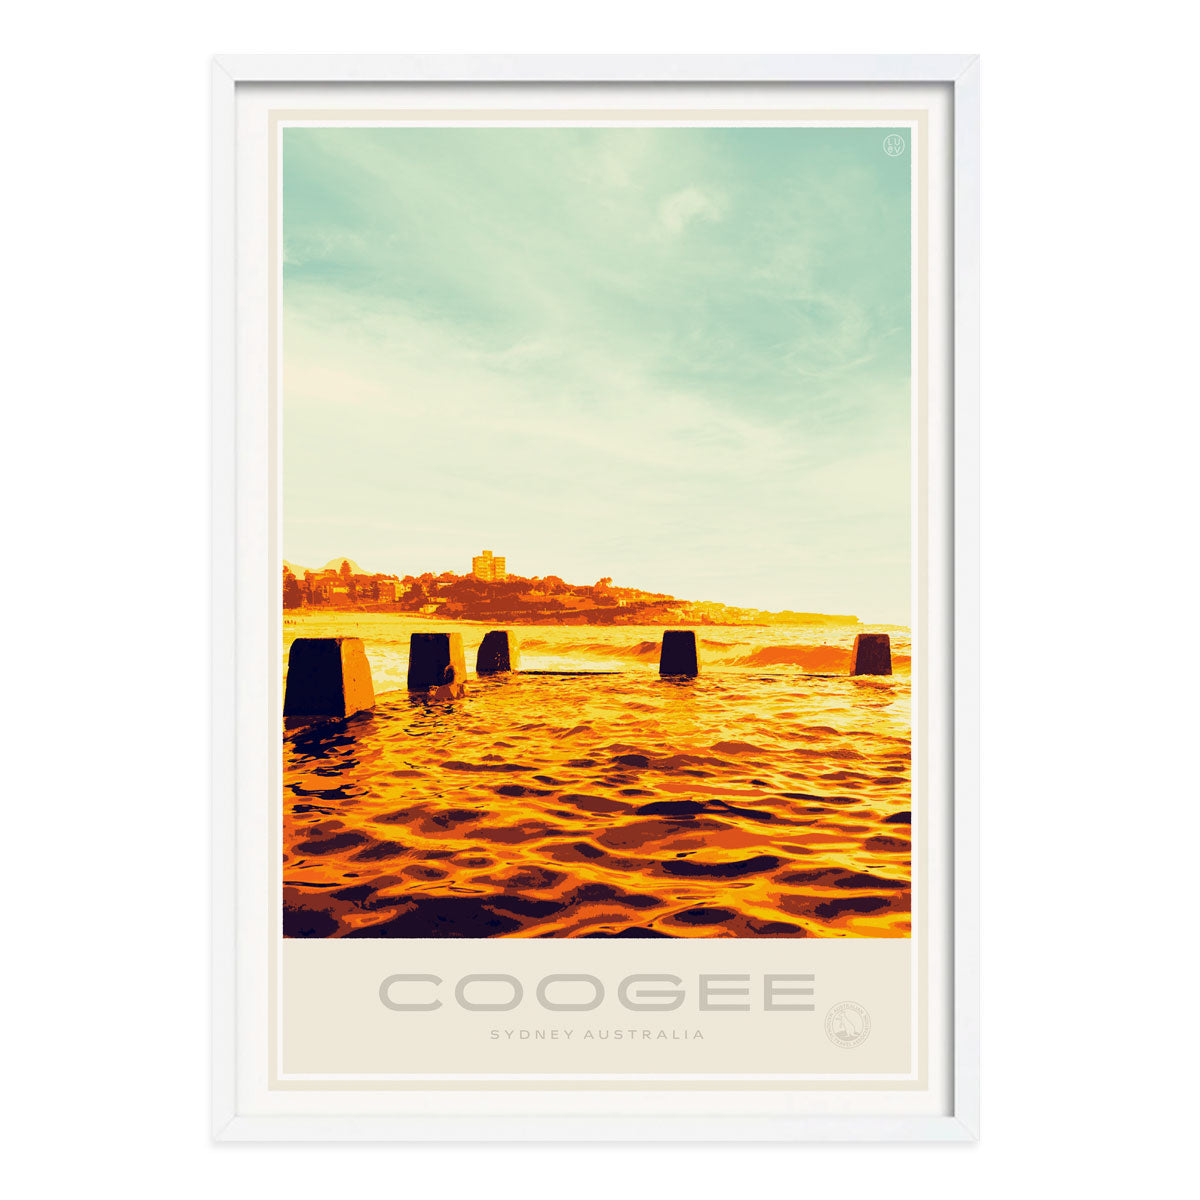 Coogee Pool Sydney vintage travel style poster print in white frame by places we luv